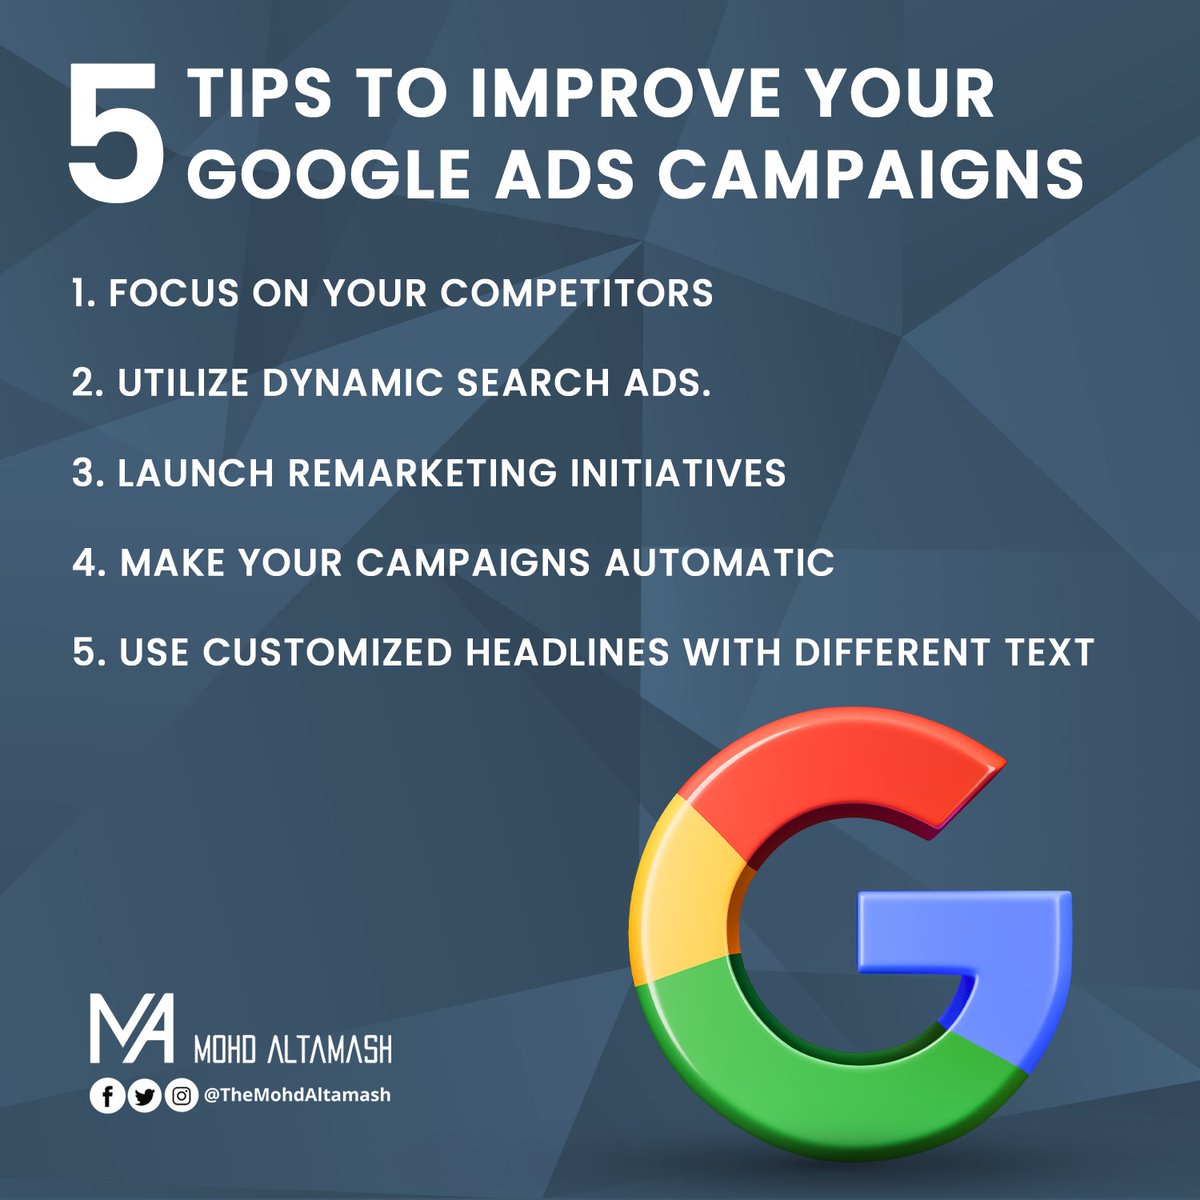 5 Tips to Improve Your Google Ads Campaigns

#altamash #googleadwords #googleadstips #googleadscampaign #googleads #googleadsexpert #googleadsmarketing #paidcampaigns